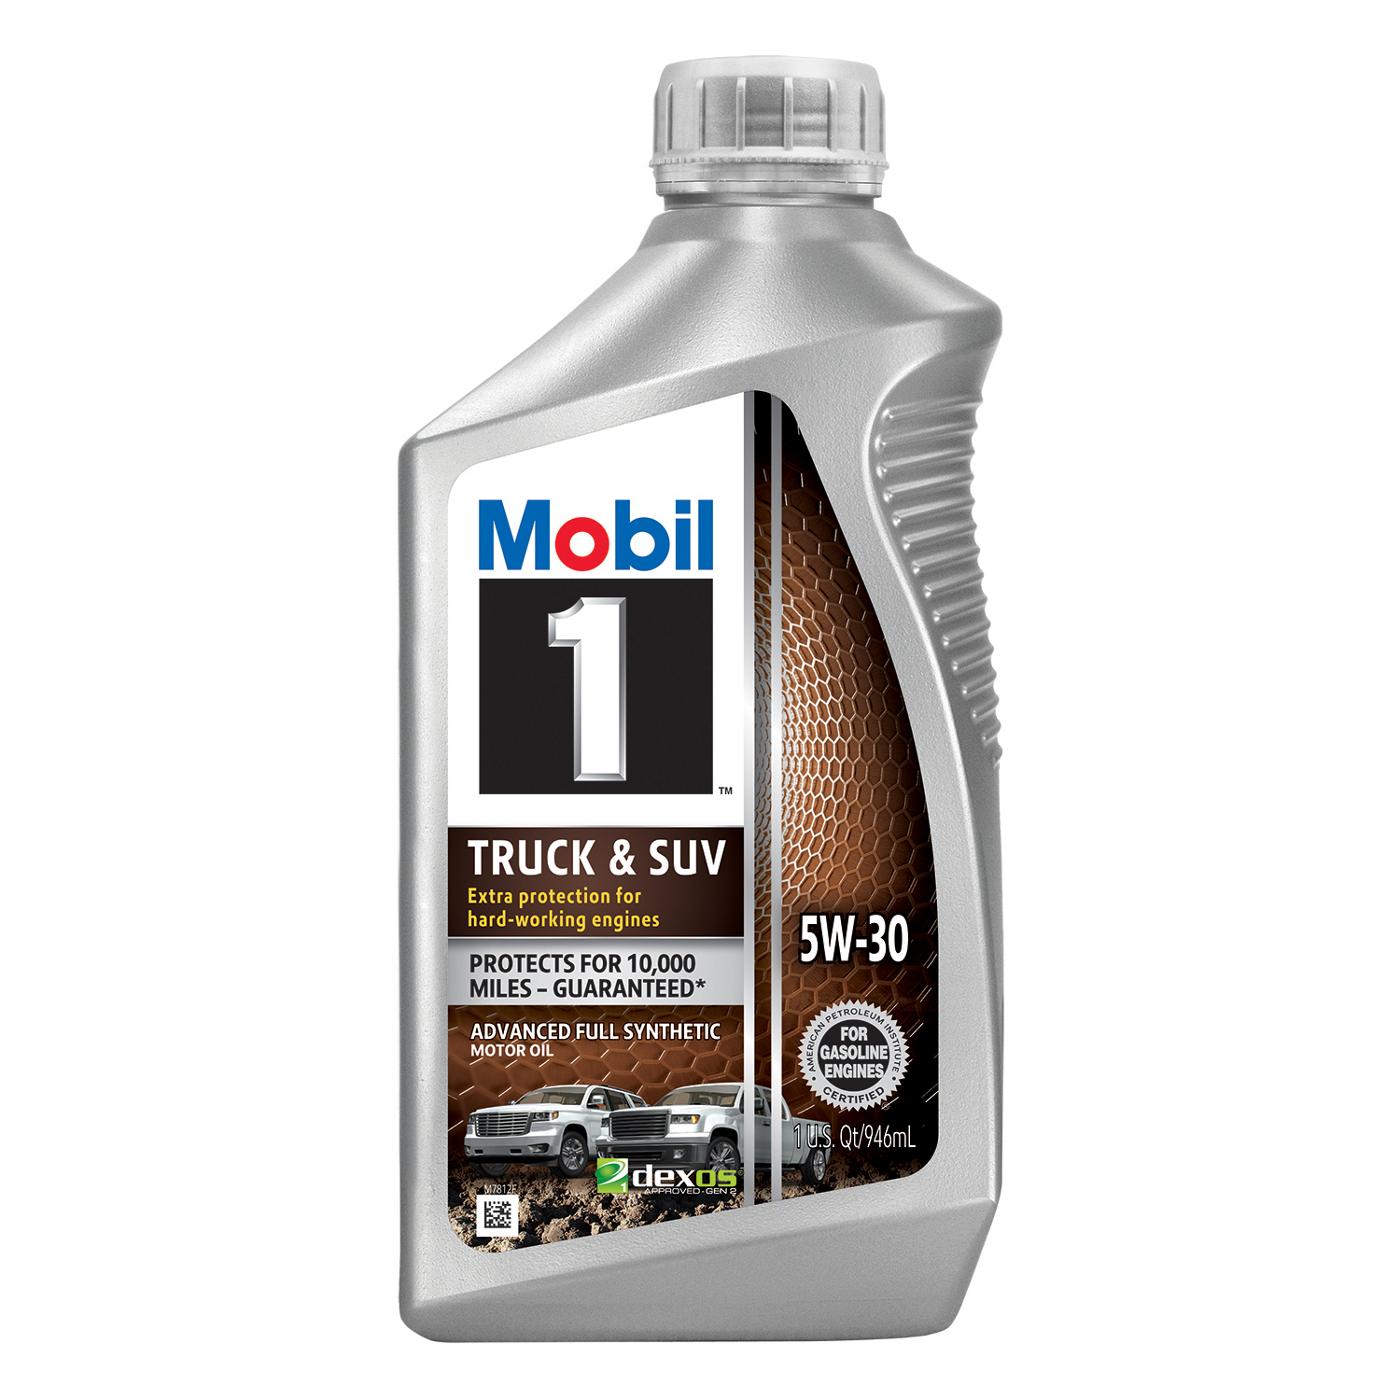 Mobil 1 5W-30 Full Synthetic Truck & SUV Motor Oil; image 1 of 2